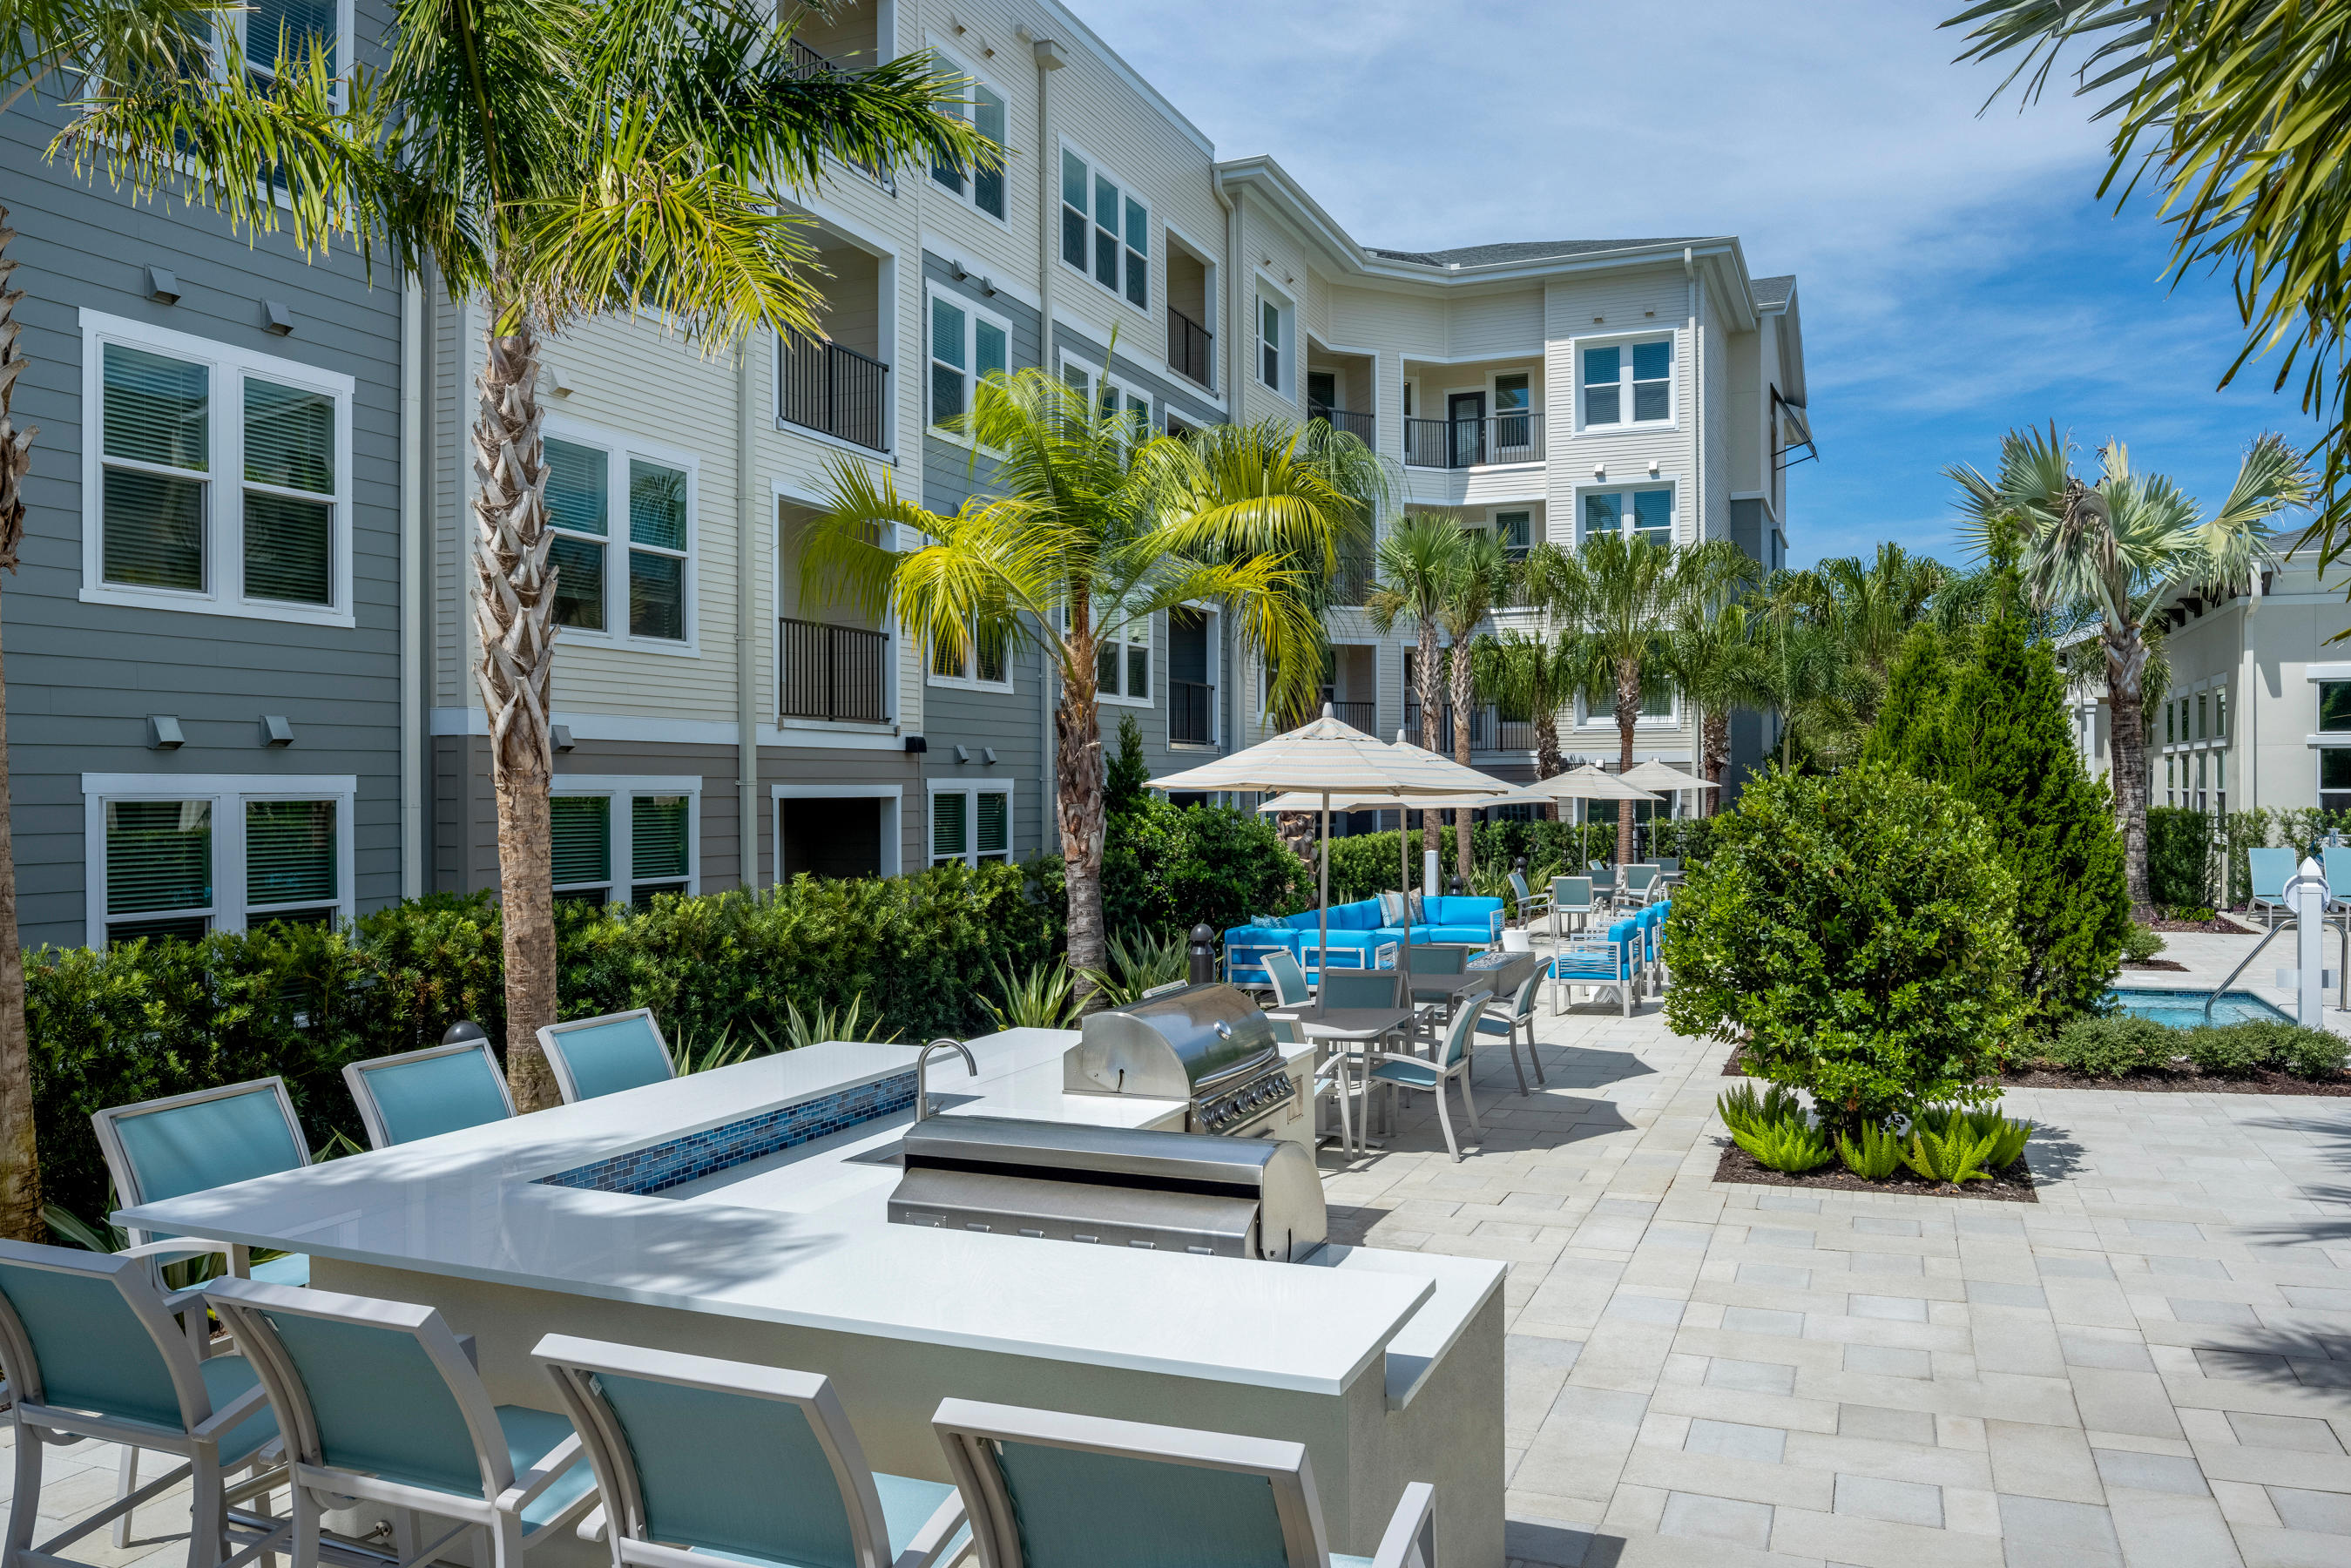 Summer Kitchen with BBQ Grills at Waverly Terrace luxury apartments in Temple Terrace, FL